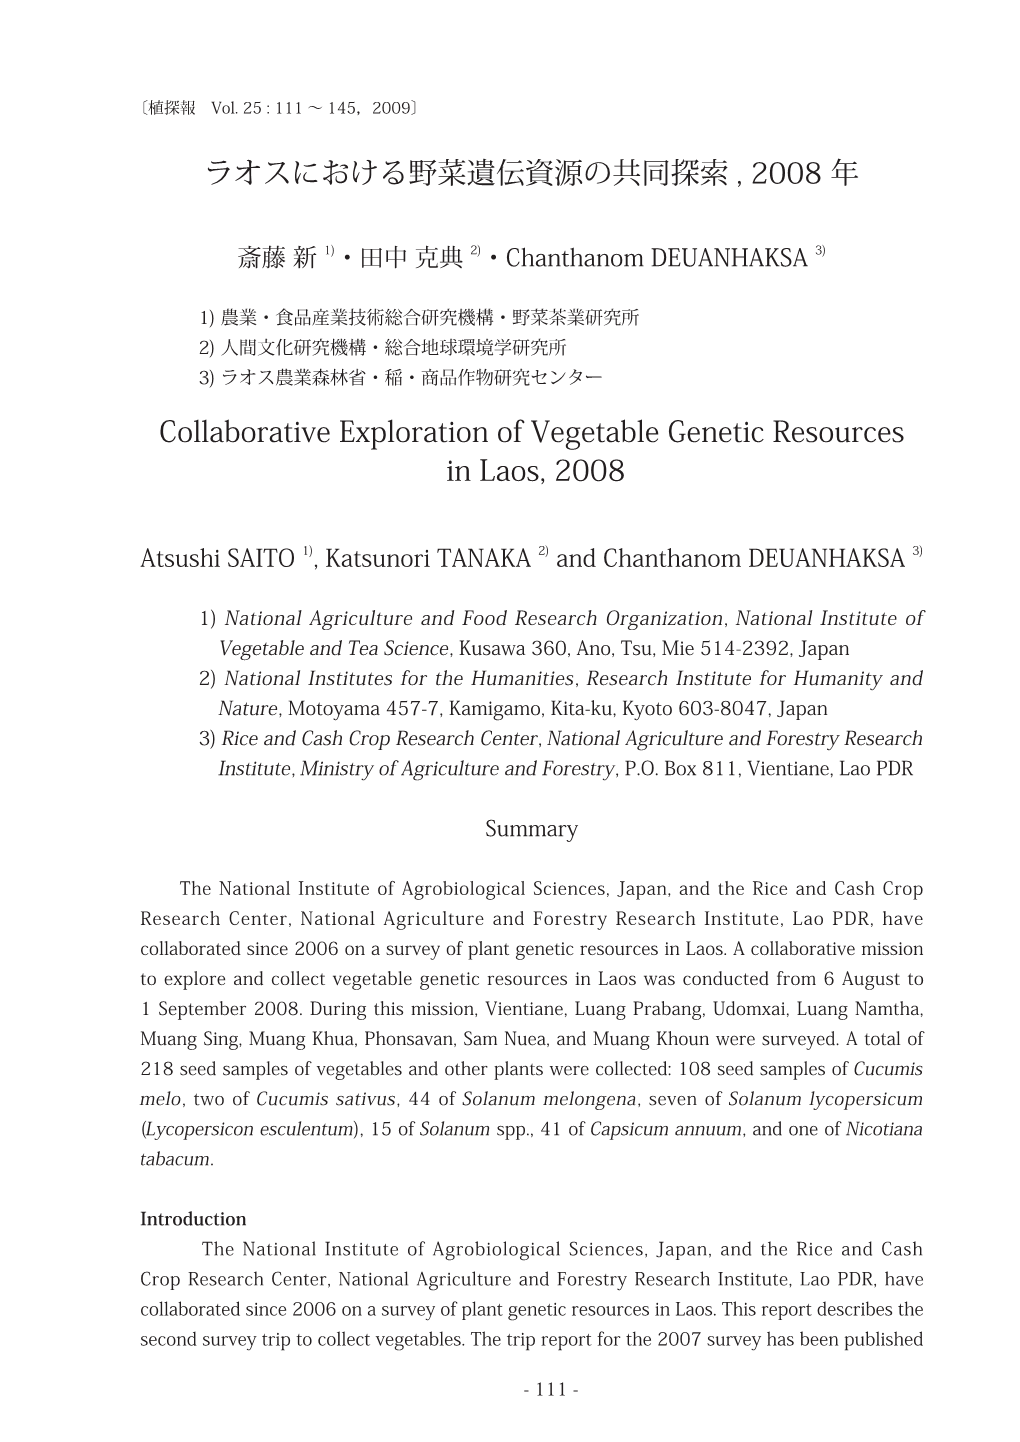 Collaborative Exploration of Vegetable Genetic Resources in Laos, 2008